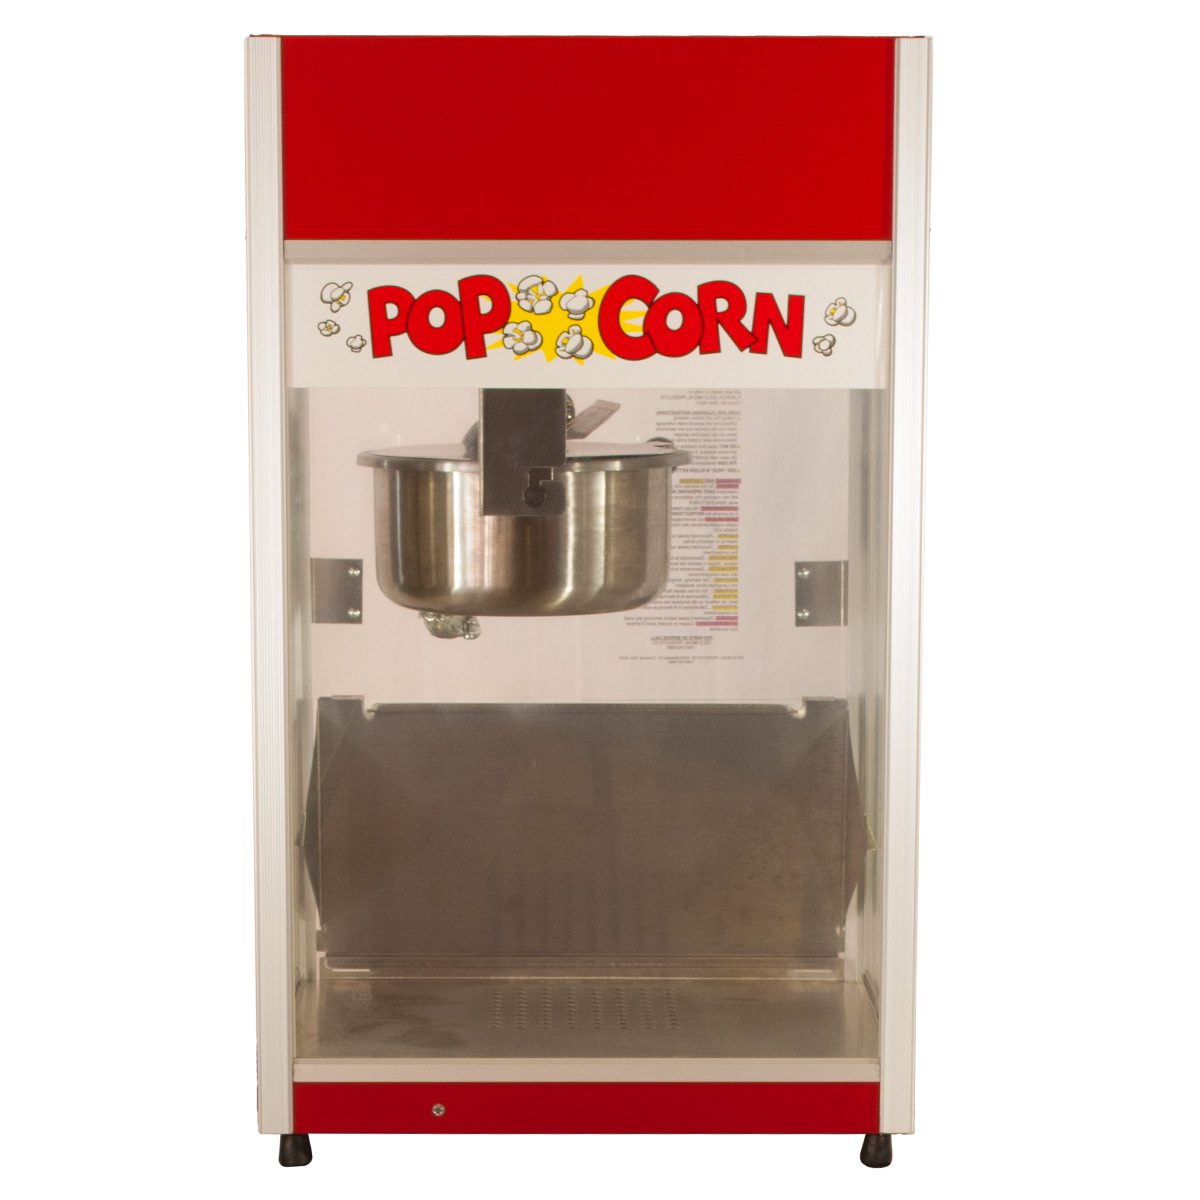 Popcorn Machine - Ultra Party by A&S Party Rental